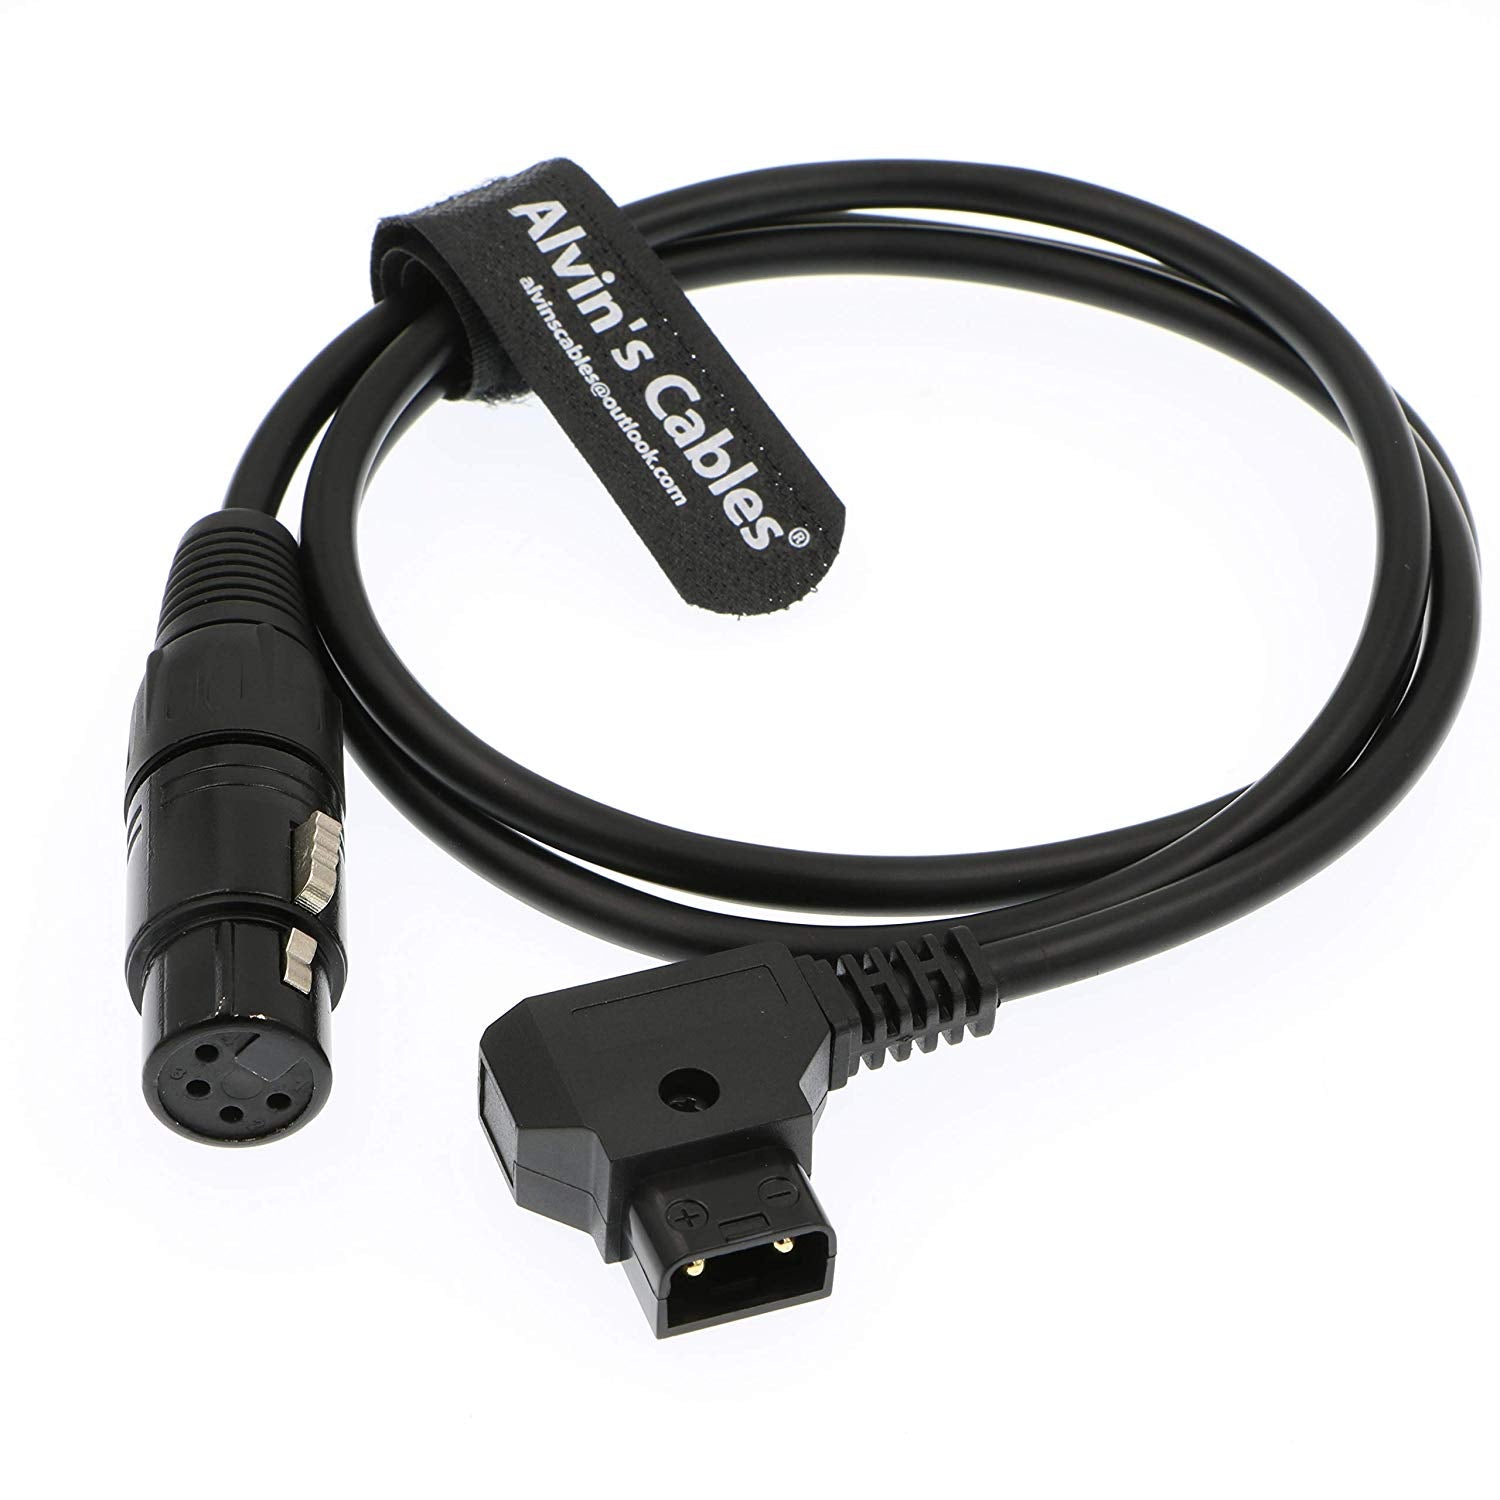 Alvin's Cables XLR 4 Pin Female to D Tap Power Cable for Practilite 602 DSLR Camcorder Sony F55 SXS Camera